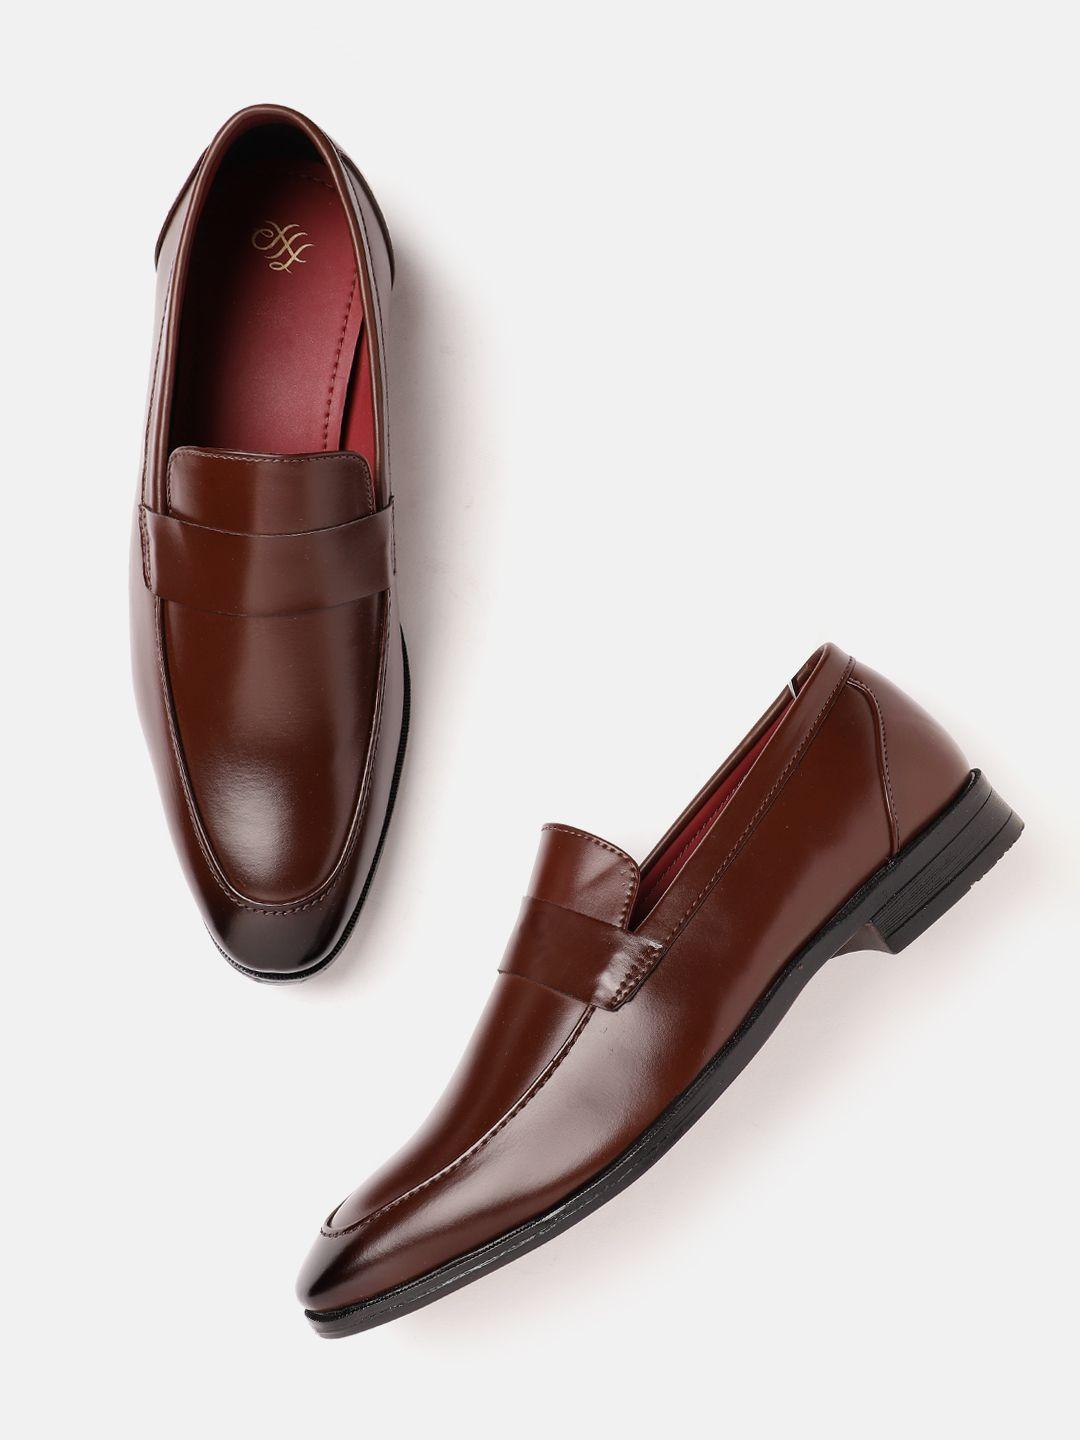 house of pataudi men handcrafted formal loafers